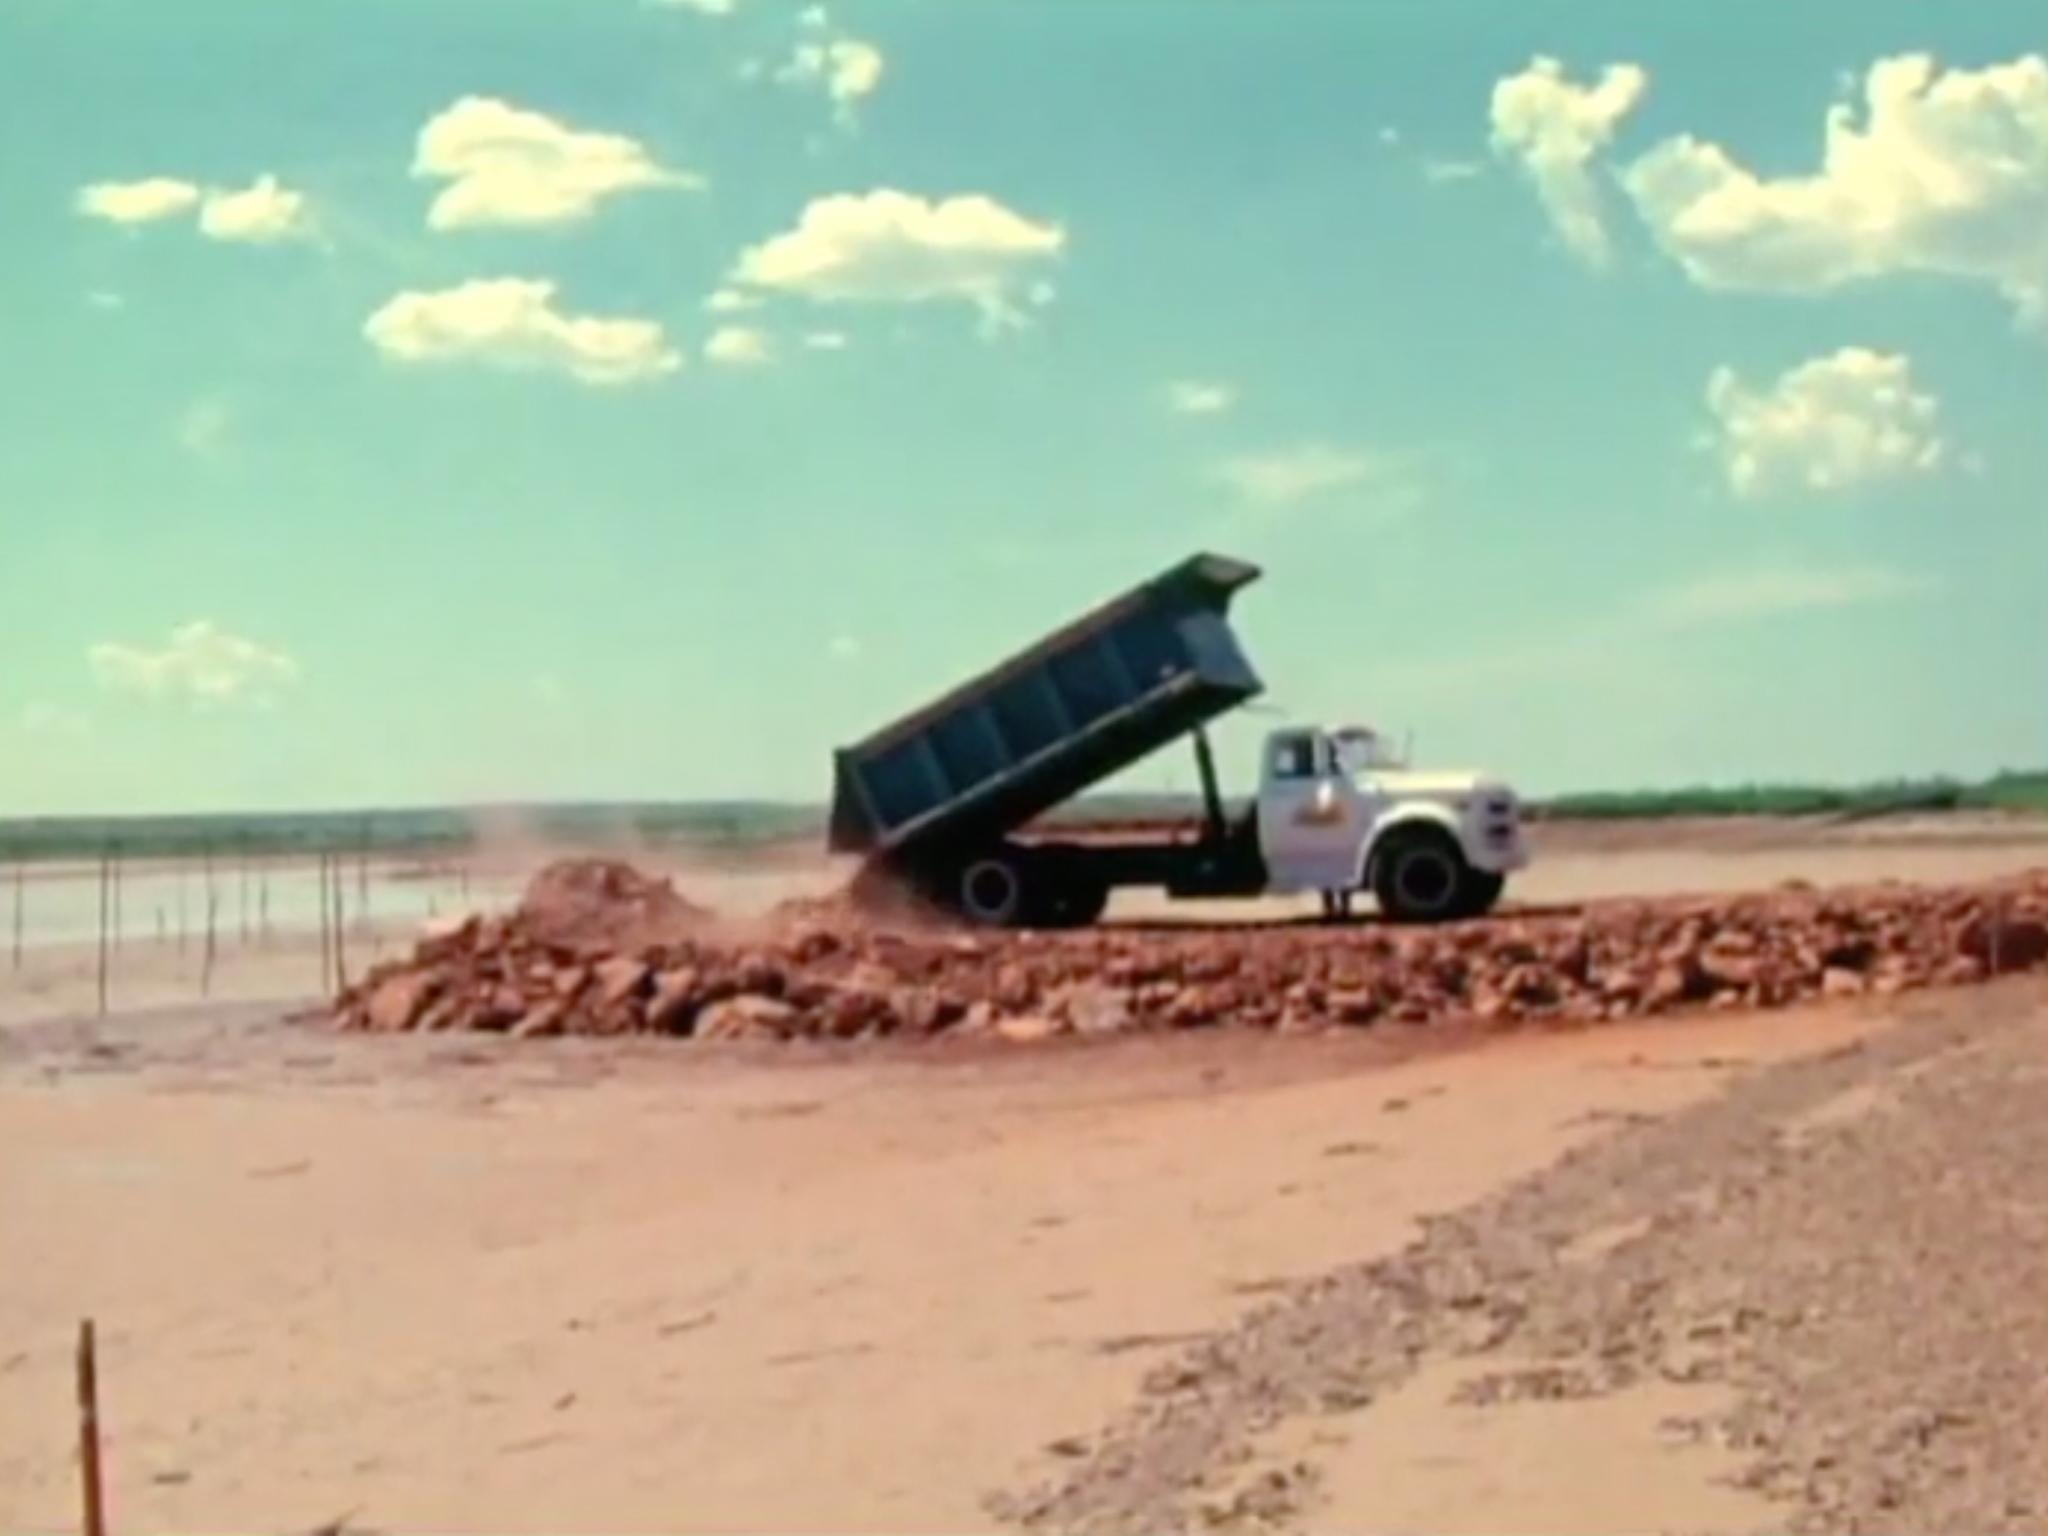 A dump truck dumping rock and earth at the edge of a lakebed